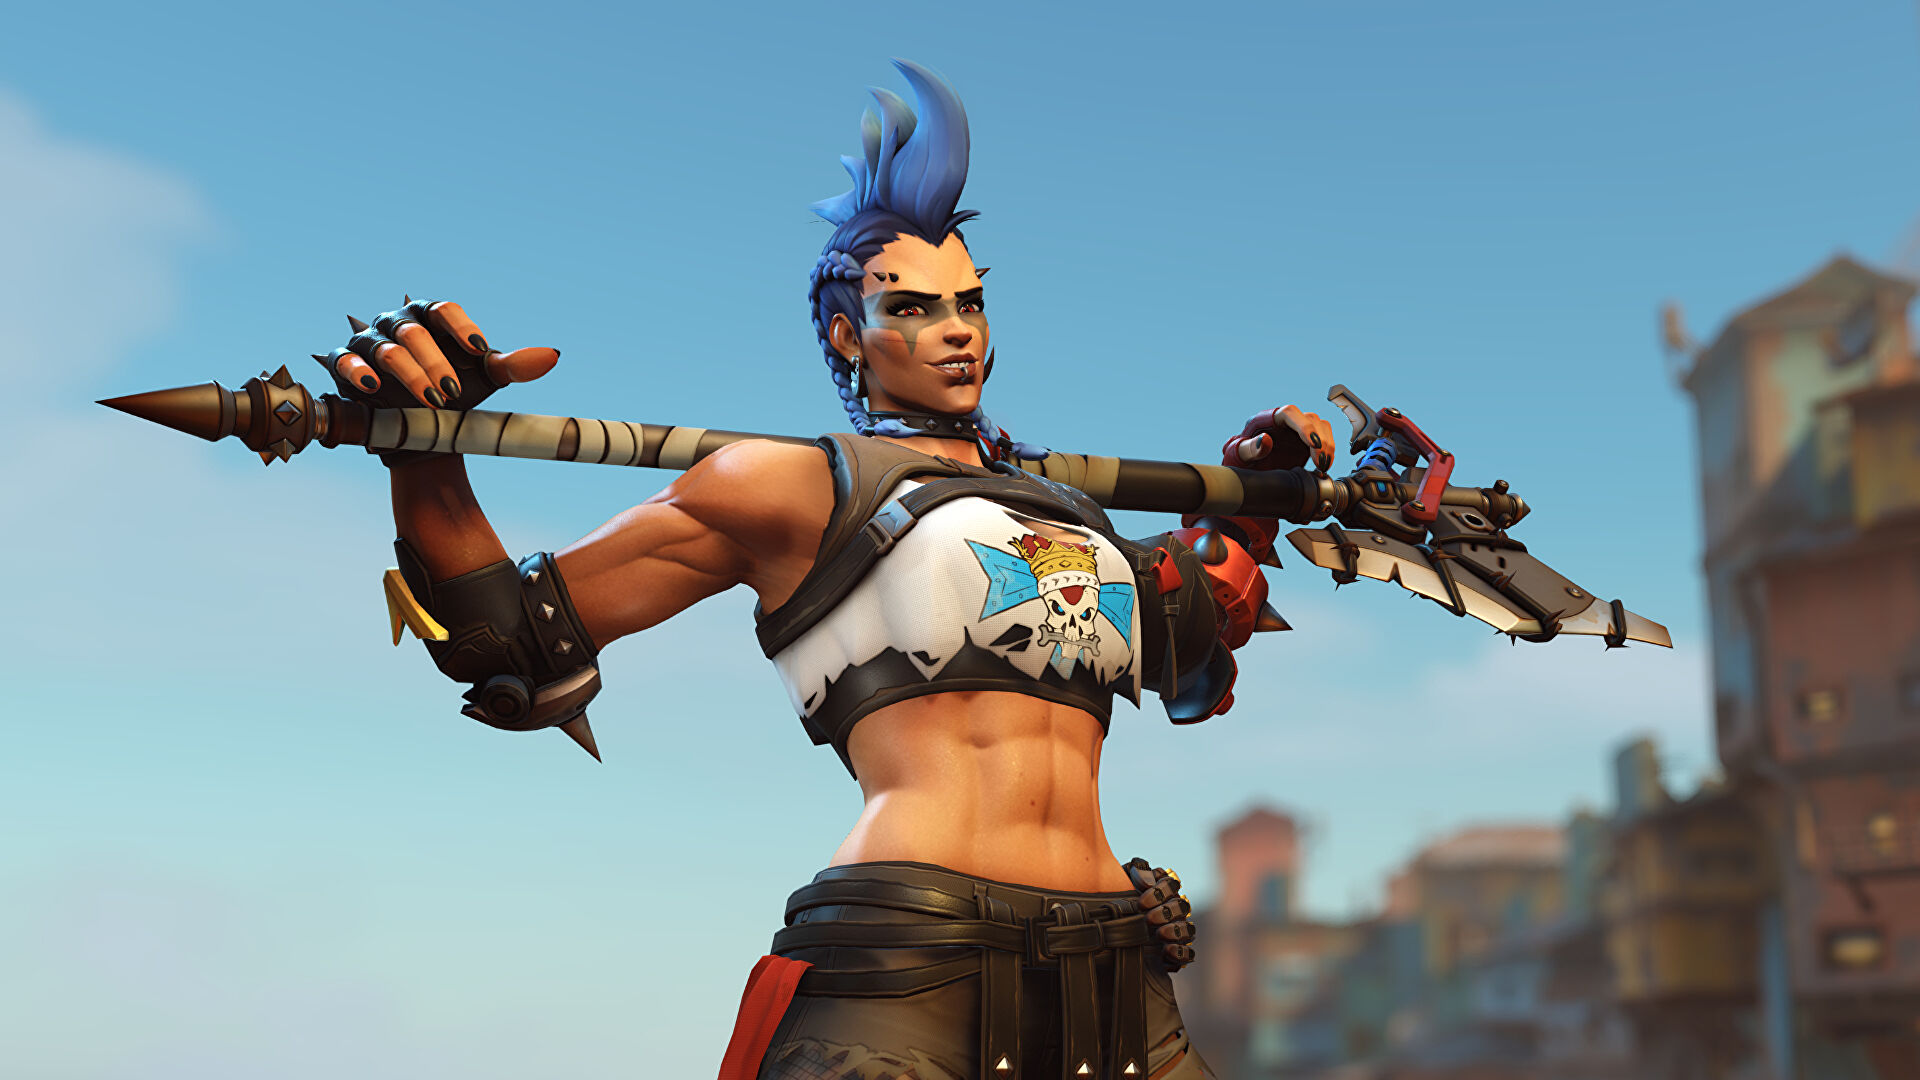 Overwatch 2 review in progress: Tonnes of fun marred by context and expectations